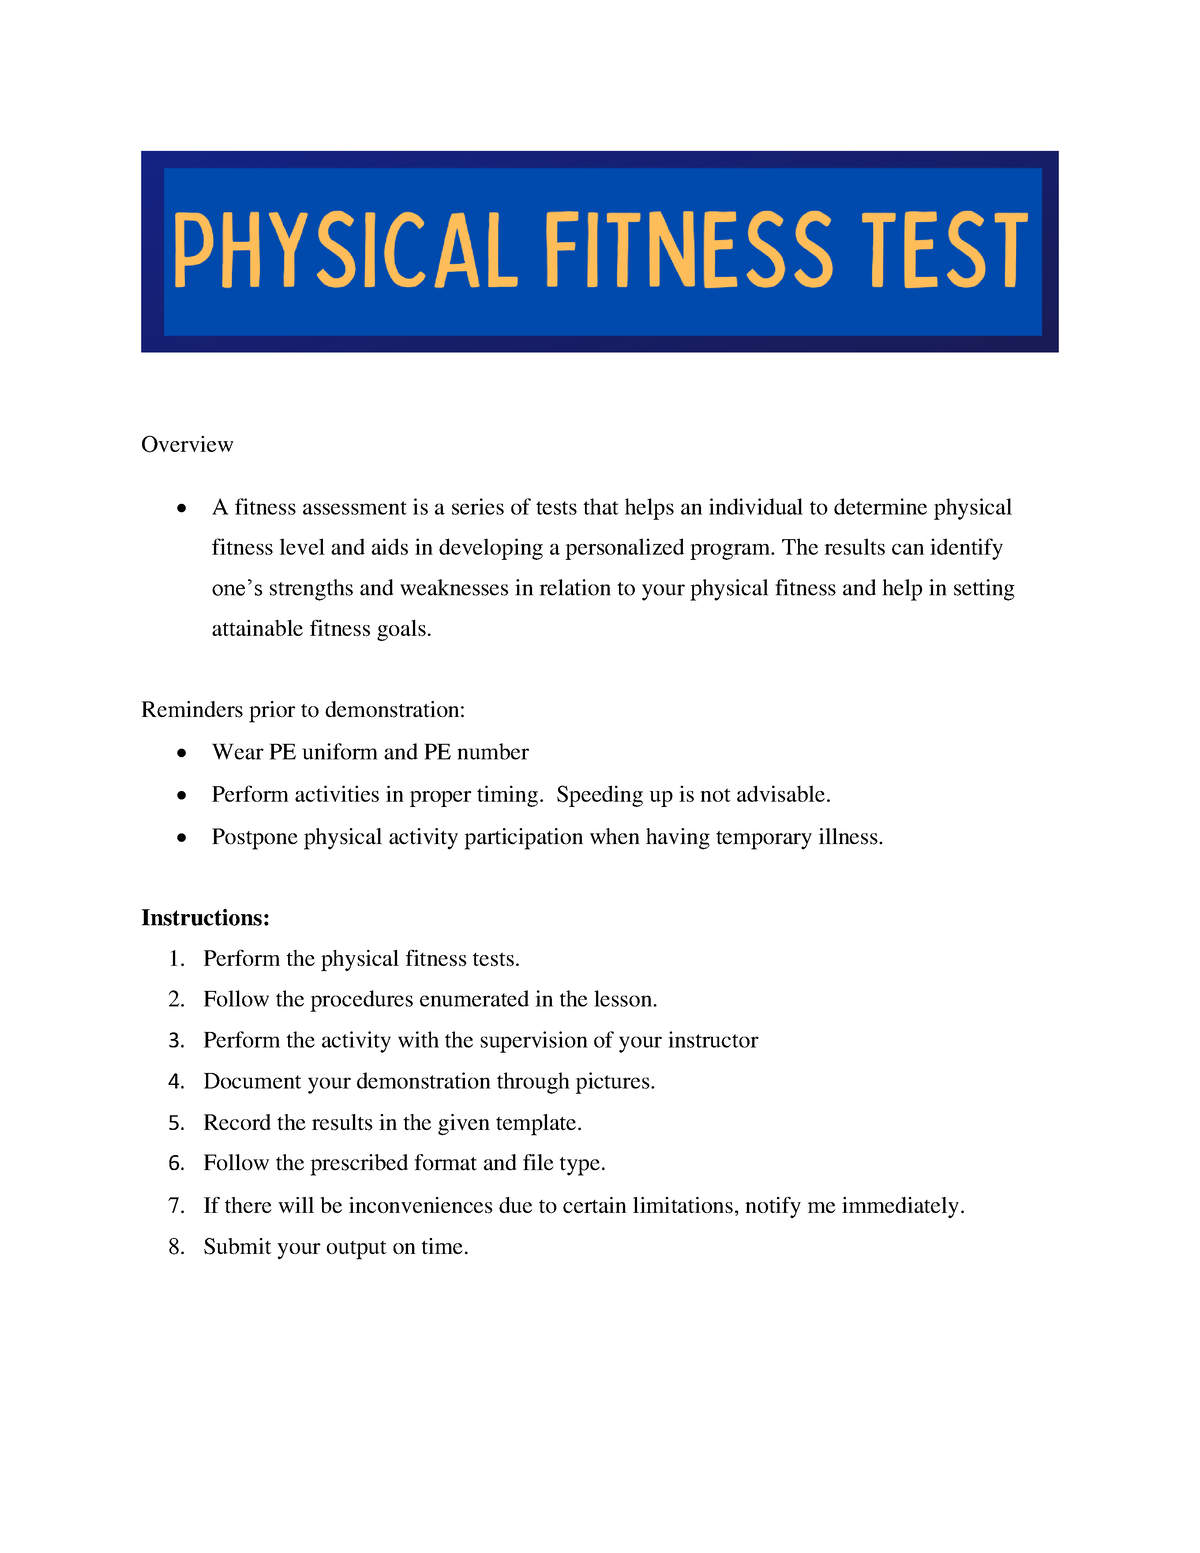 The Physical Fitness Tests 